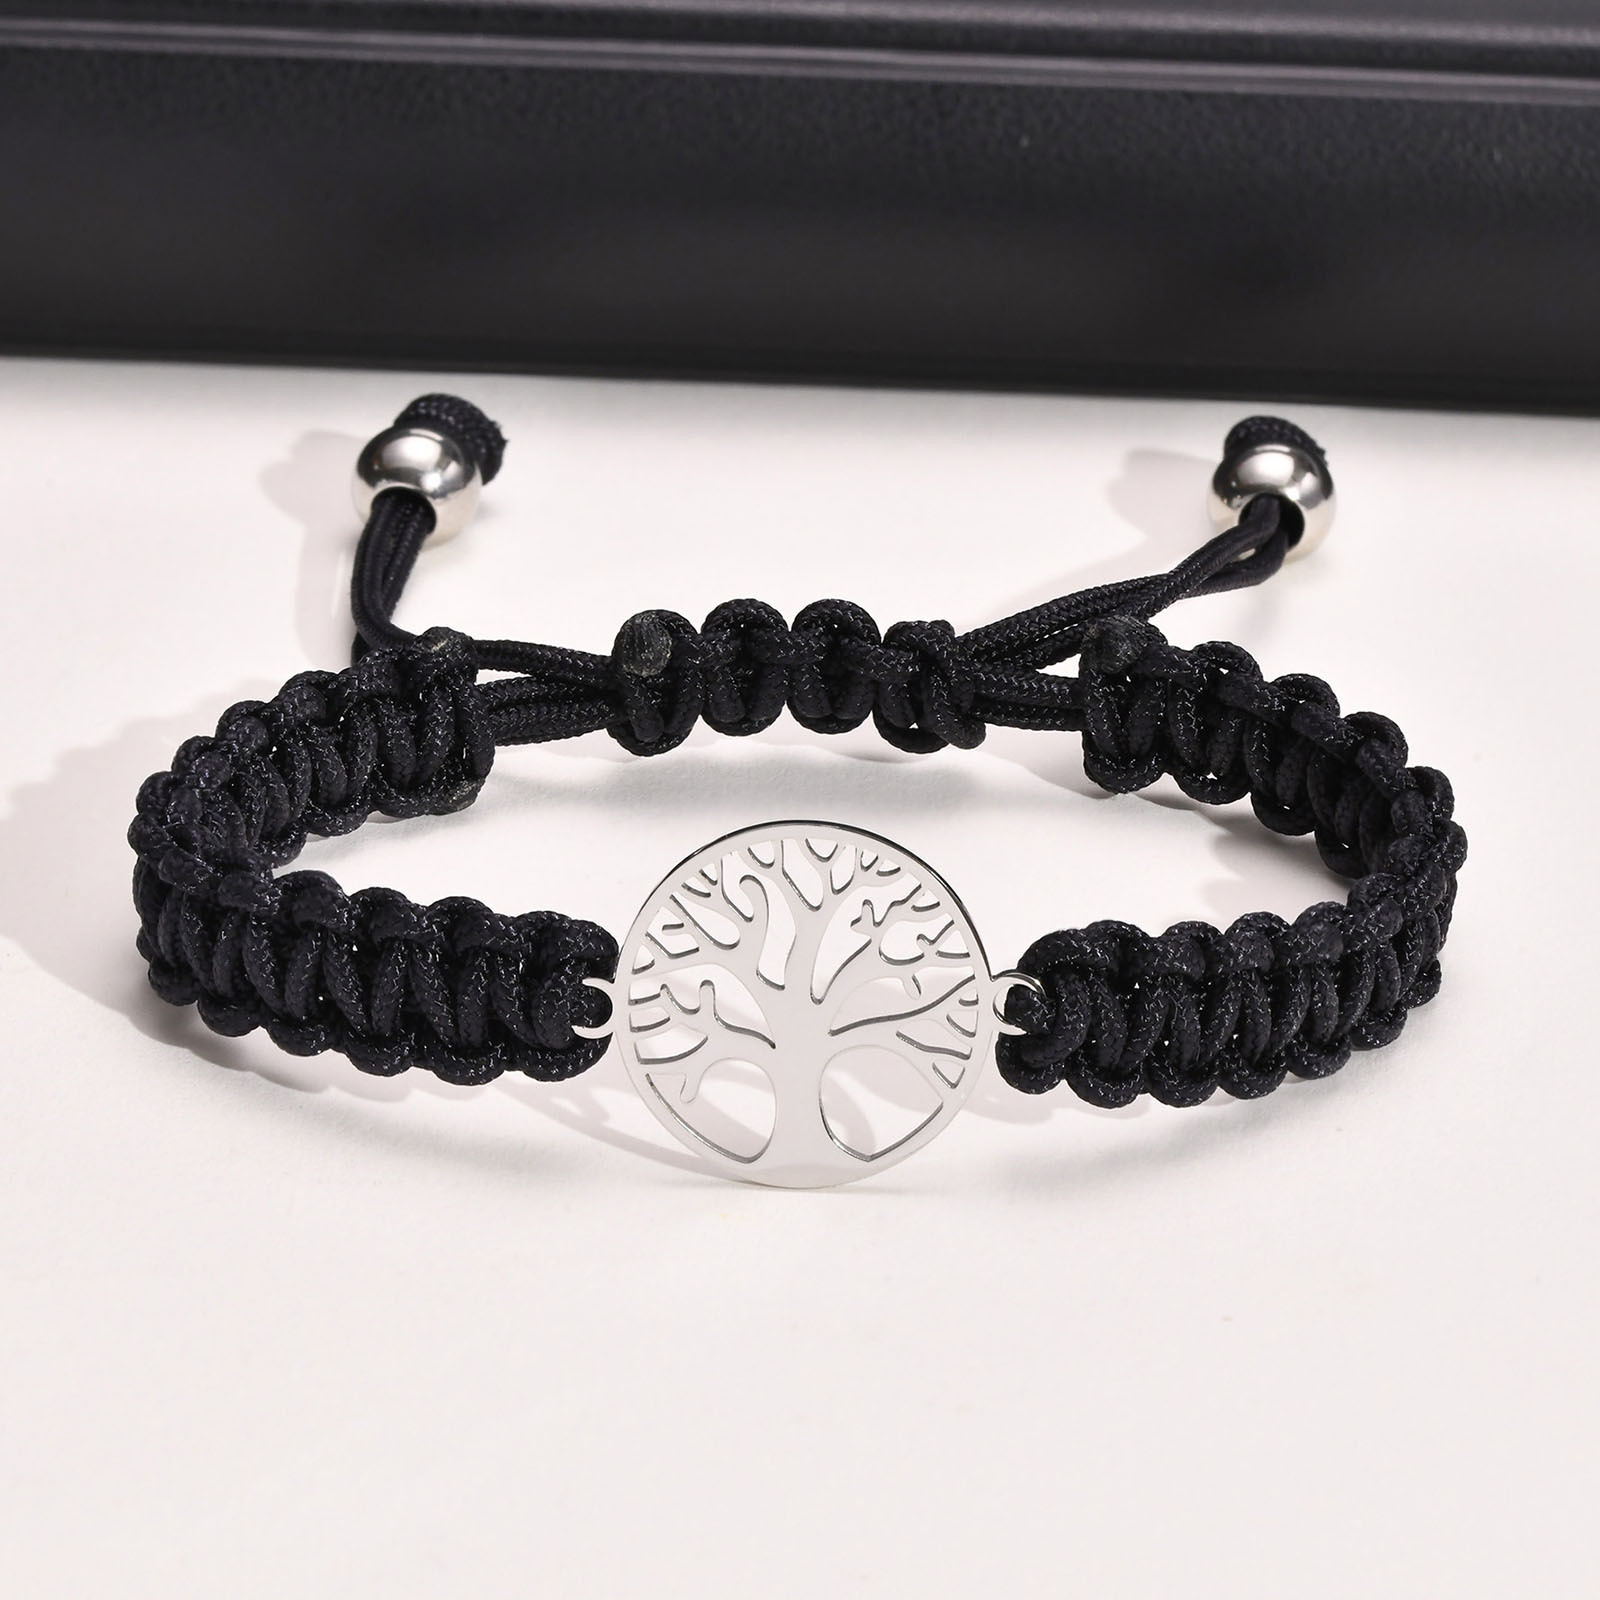 

1pc Simple Life Tree Braided Bracelet, Hip Hop Fashion Jewelry Family Friend Gift For Men